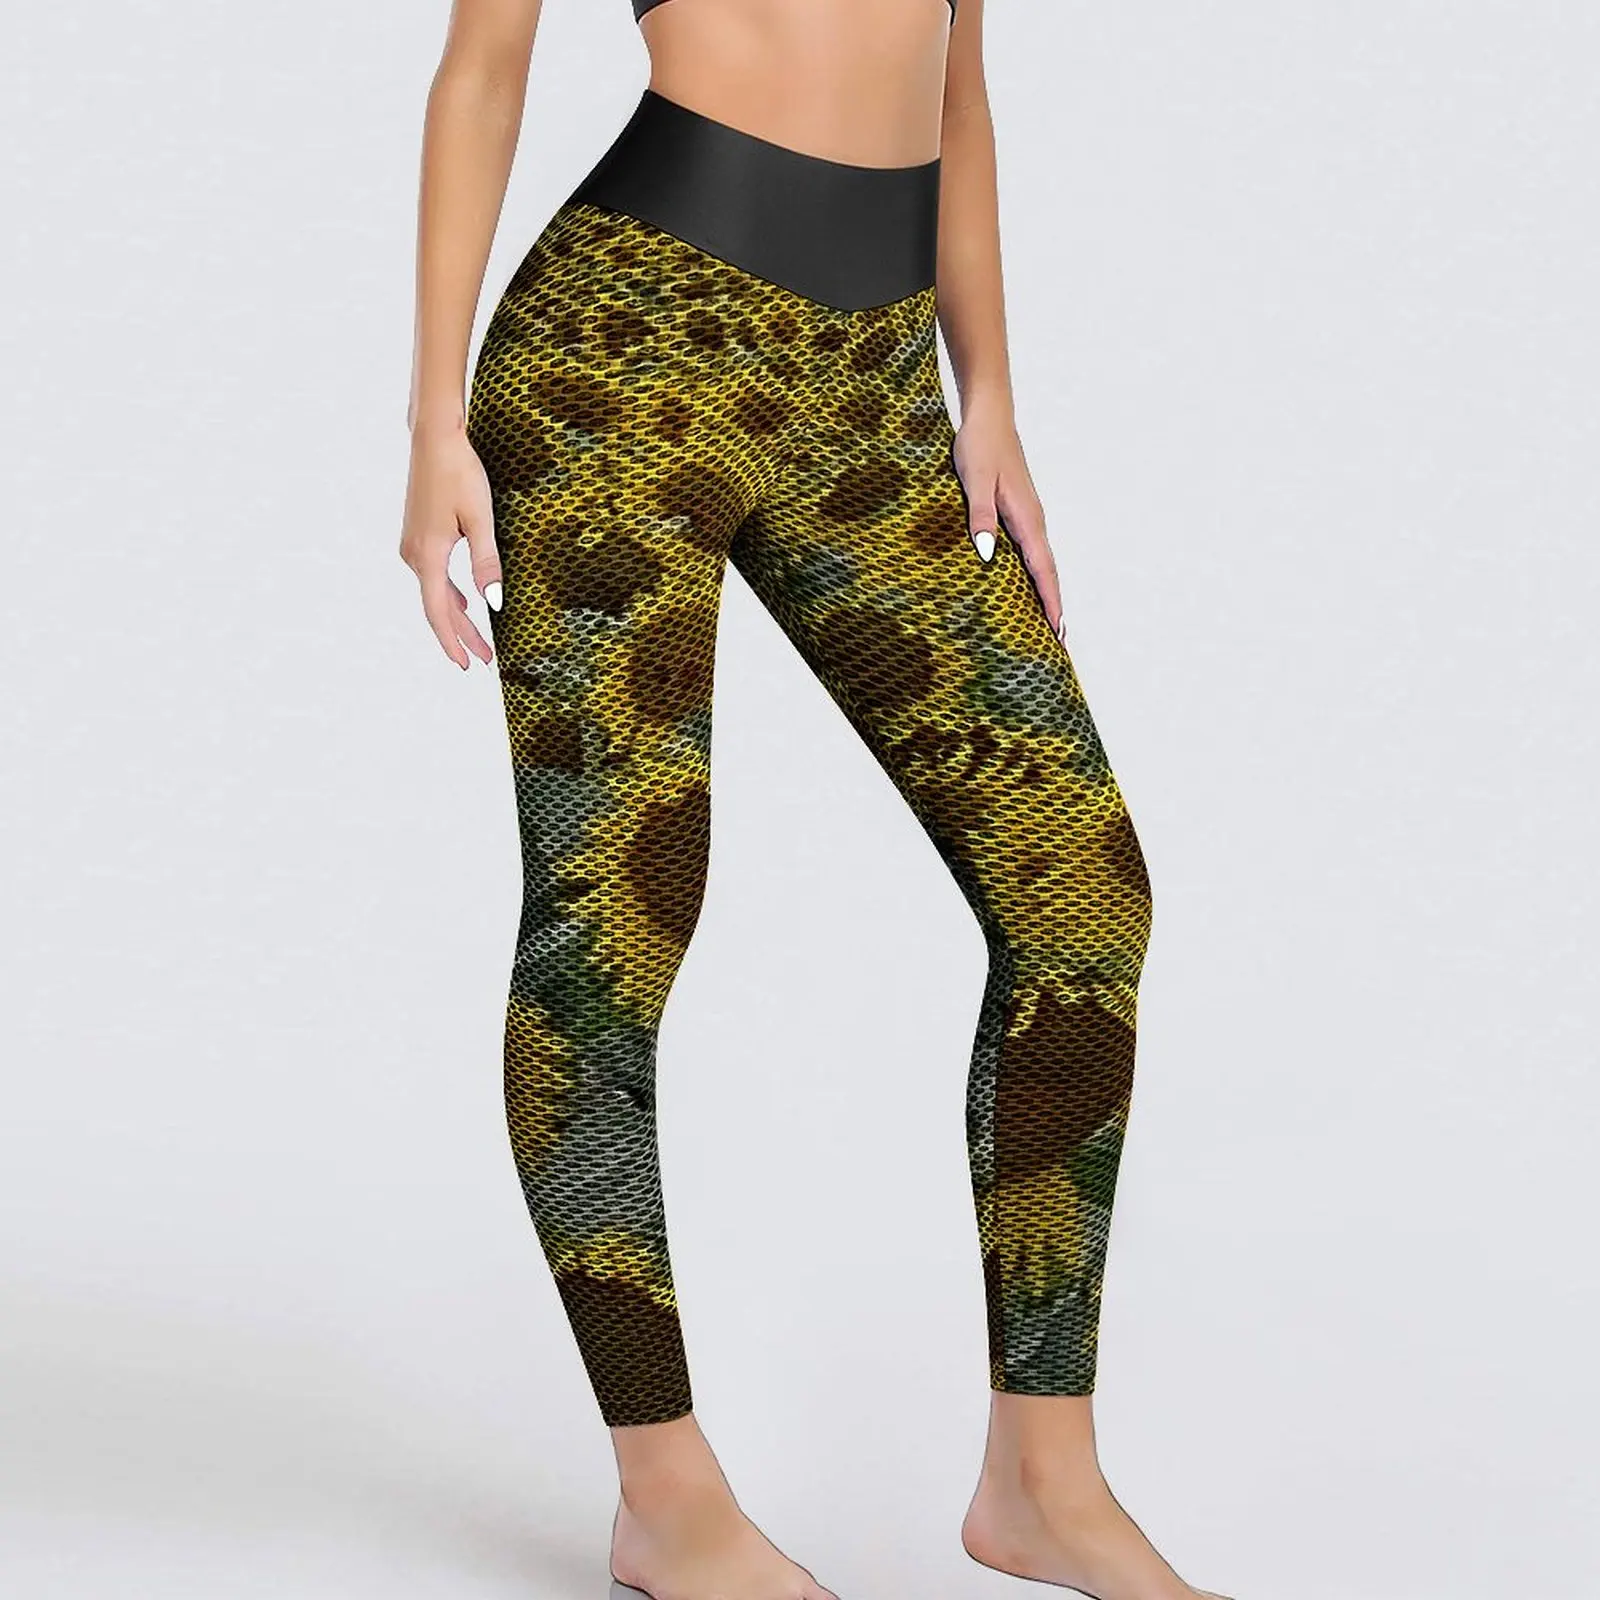 Big Sunflower Field Yoga Pants Sexy Yellow Floral Print Design Leggings High Waist Workout Leggins Funny Stretch Sports Tights